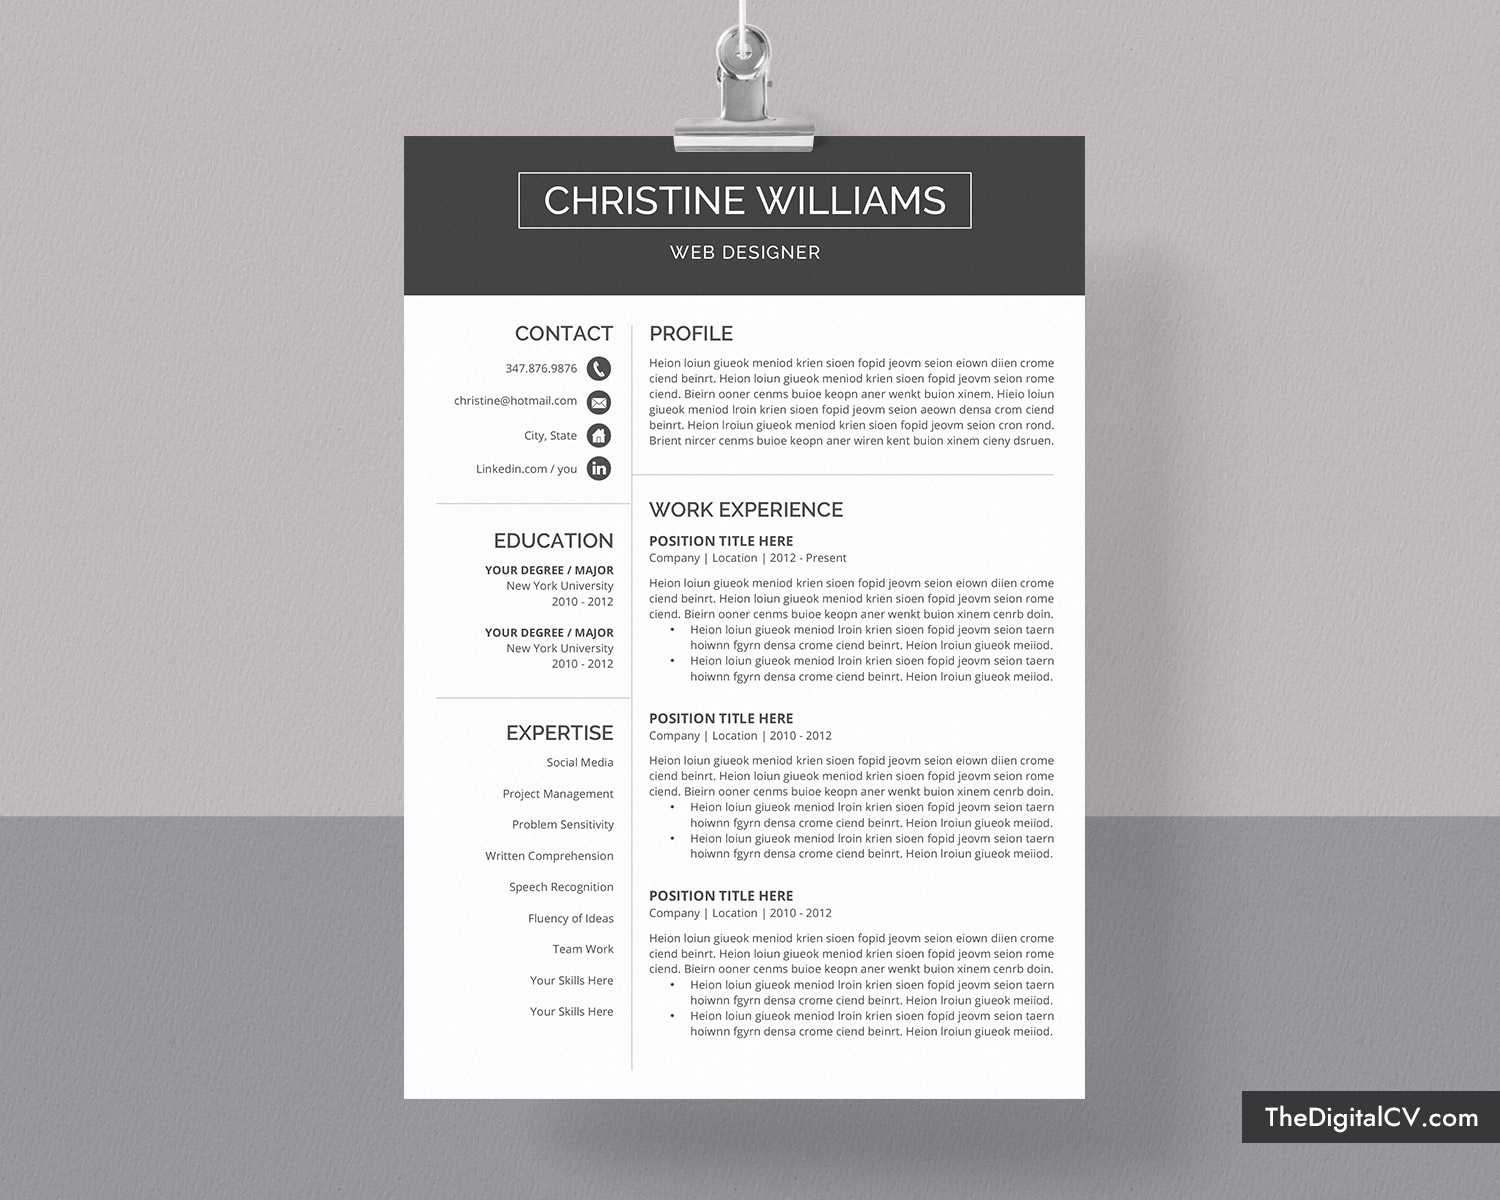 Simple And Basic Resume Template 2020 2021, Cv Template, Cover Letter,  Microsoft Word Resume Template, 1 3 Page, Modern Resume, Creative Resume, Regarding Microsoft Word Resumes Templates